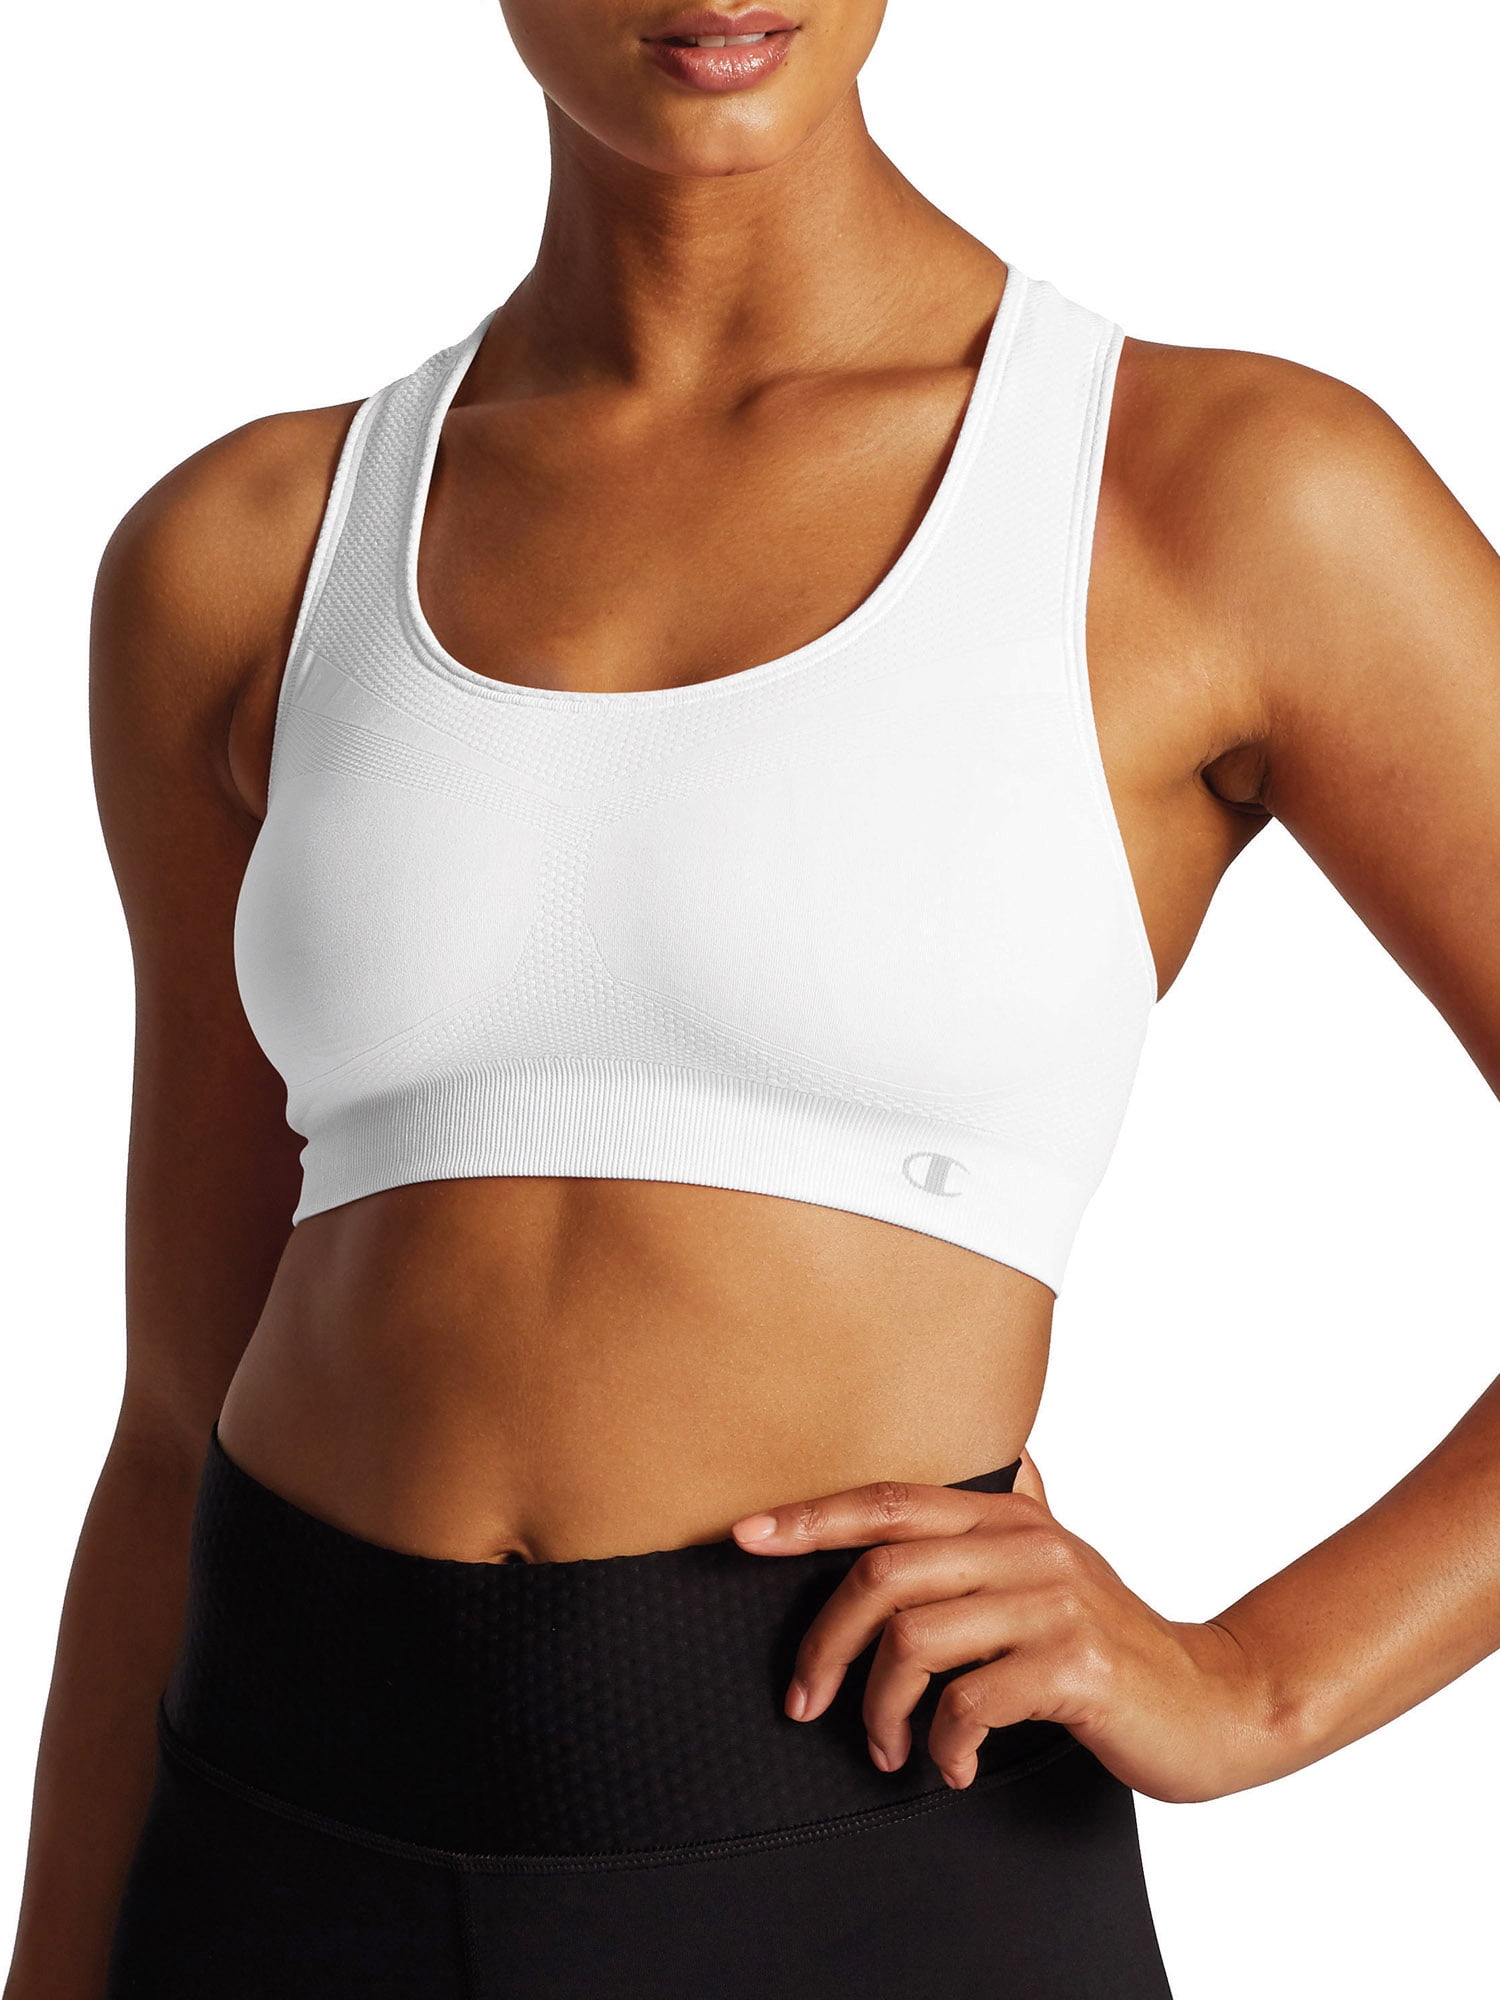 Fit Bee Black and White Zigzag Sports Bras Summer Yoga Padded Crop Tank Top